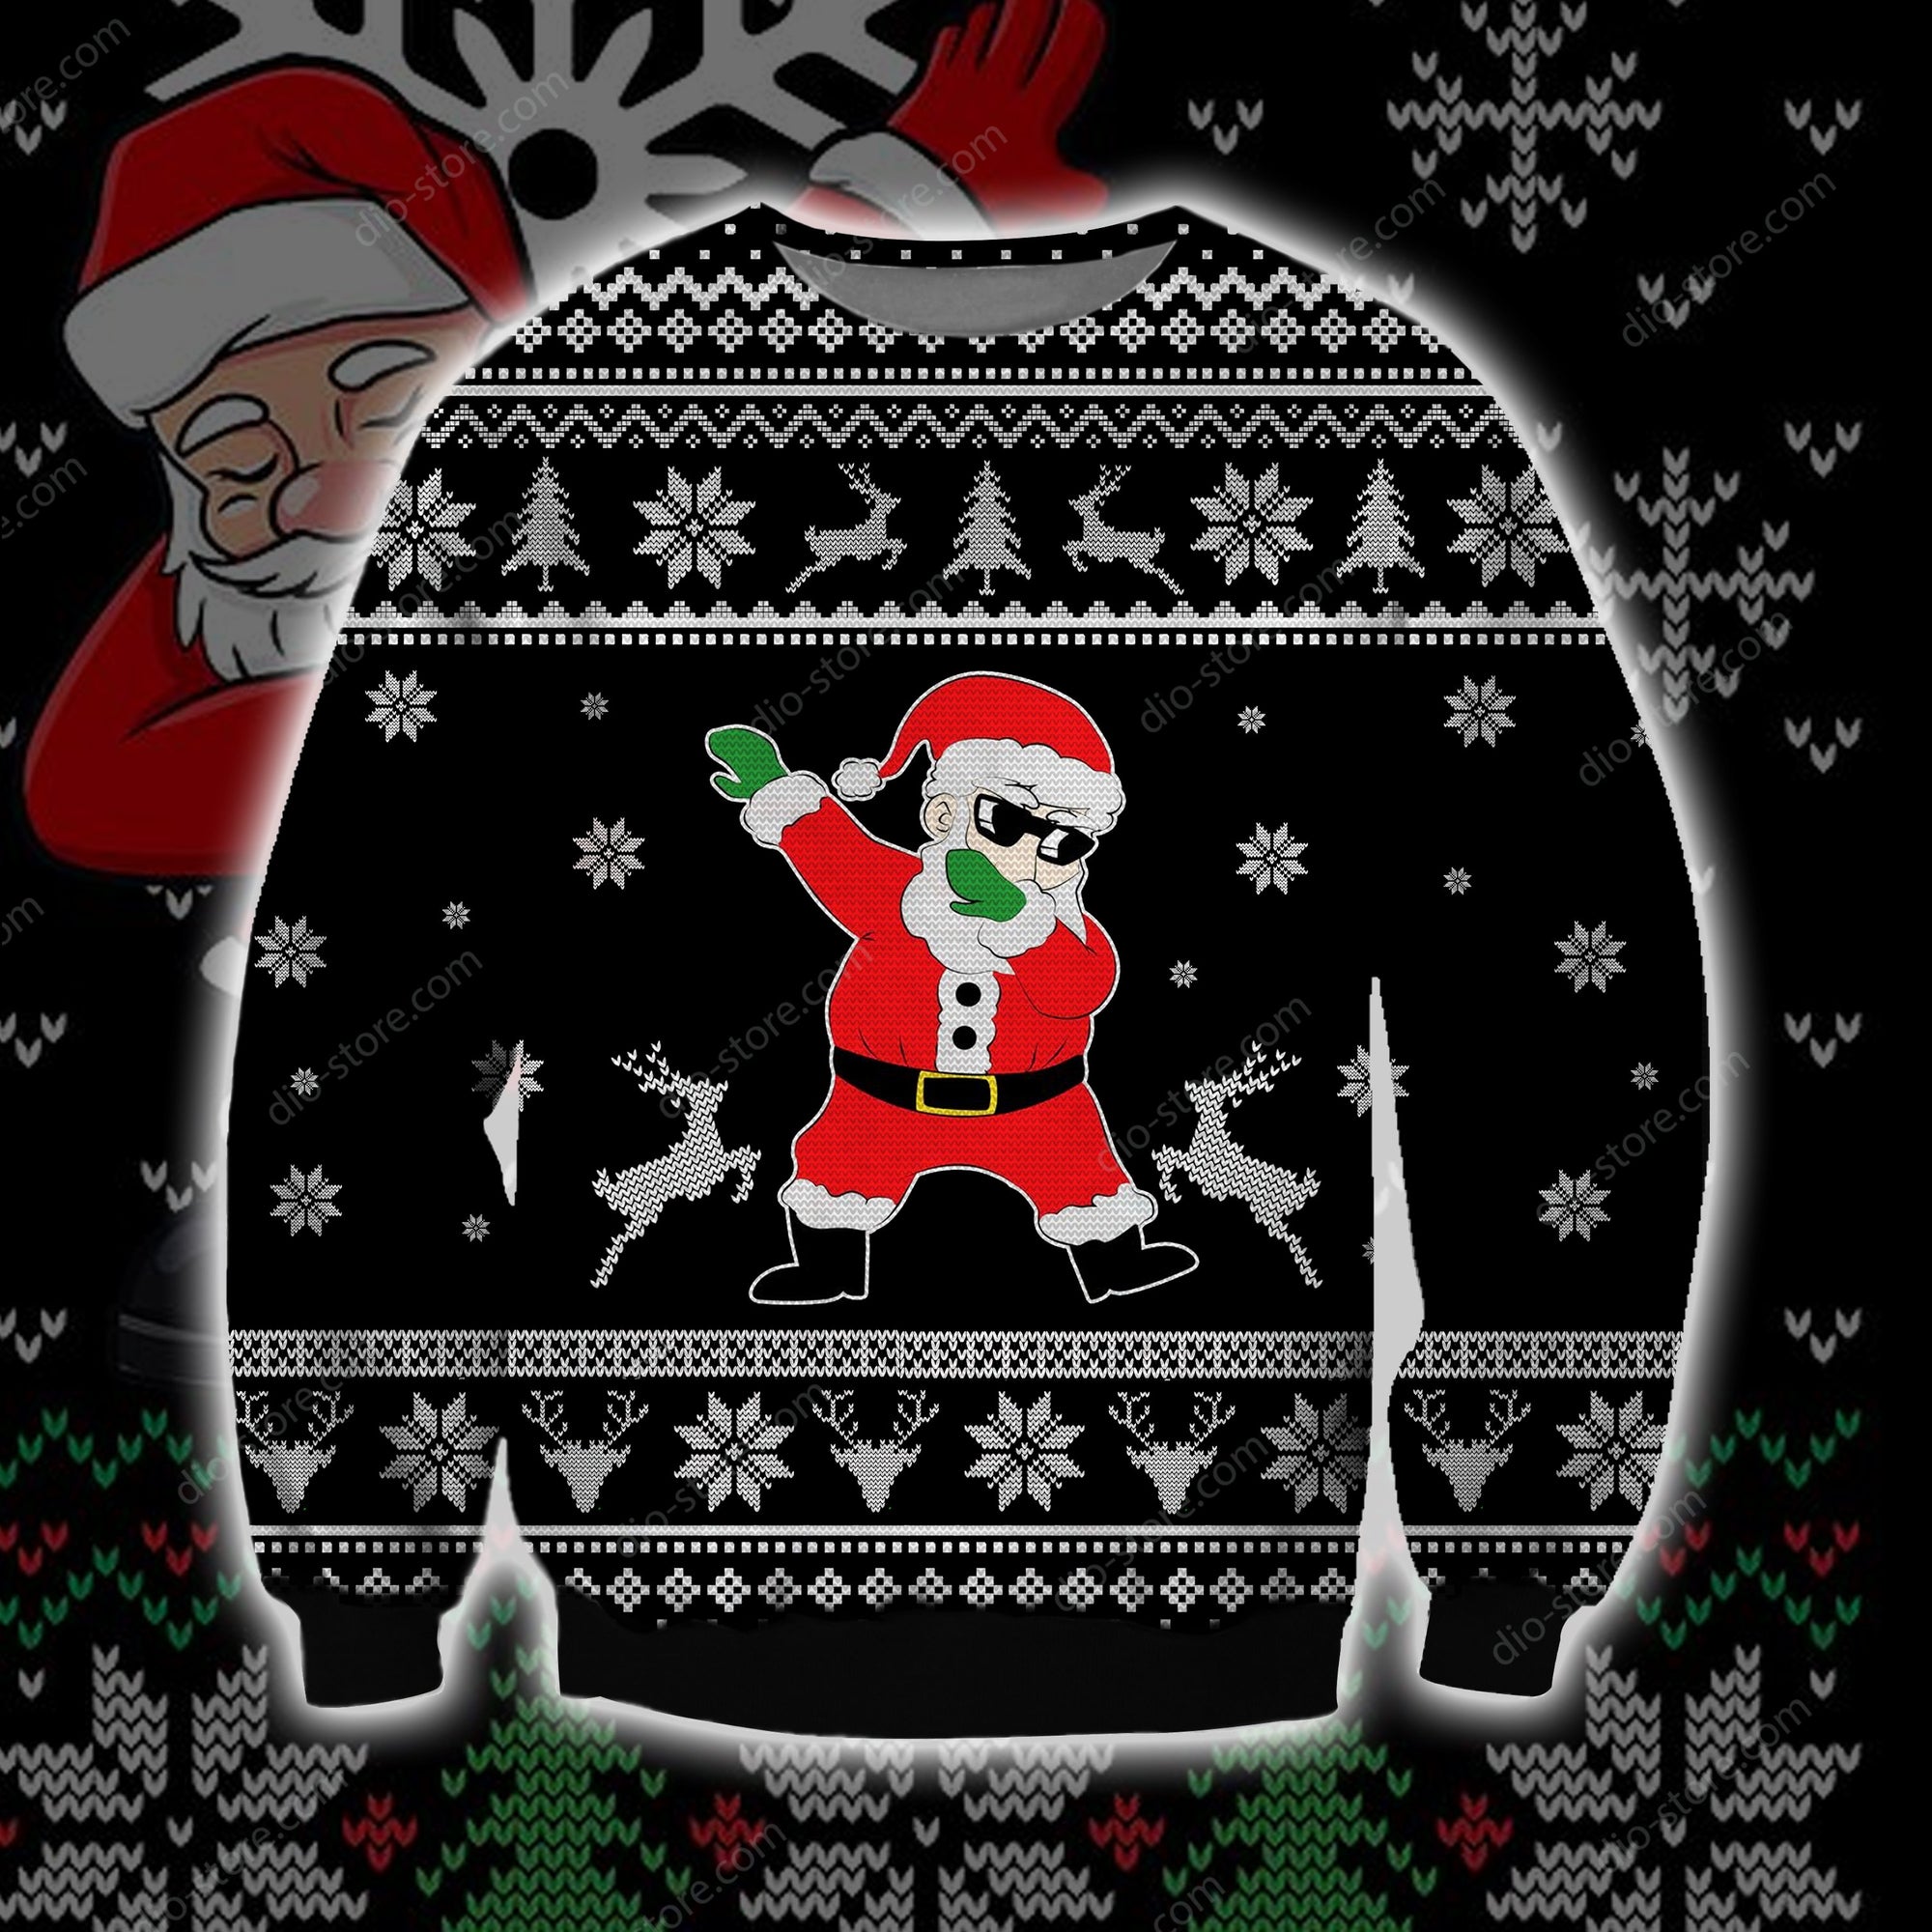 Santa Dabbing Knitting Pattern 3D Print Ugly Christmas Sweater Hoodie All Over Printed Cint10510